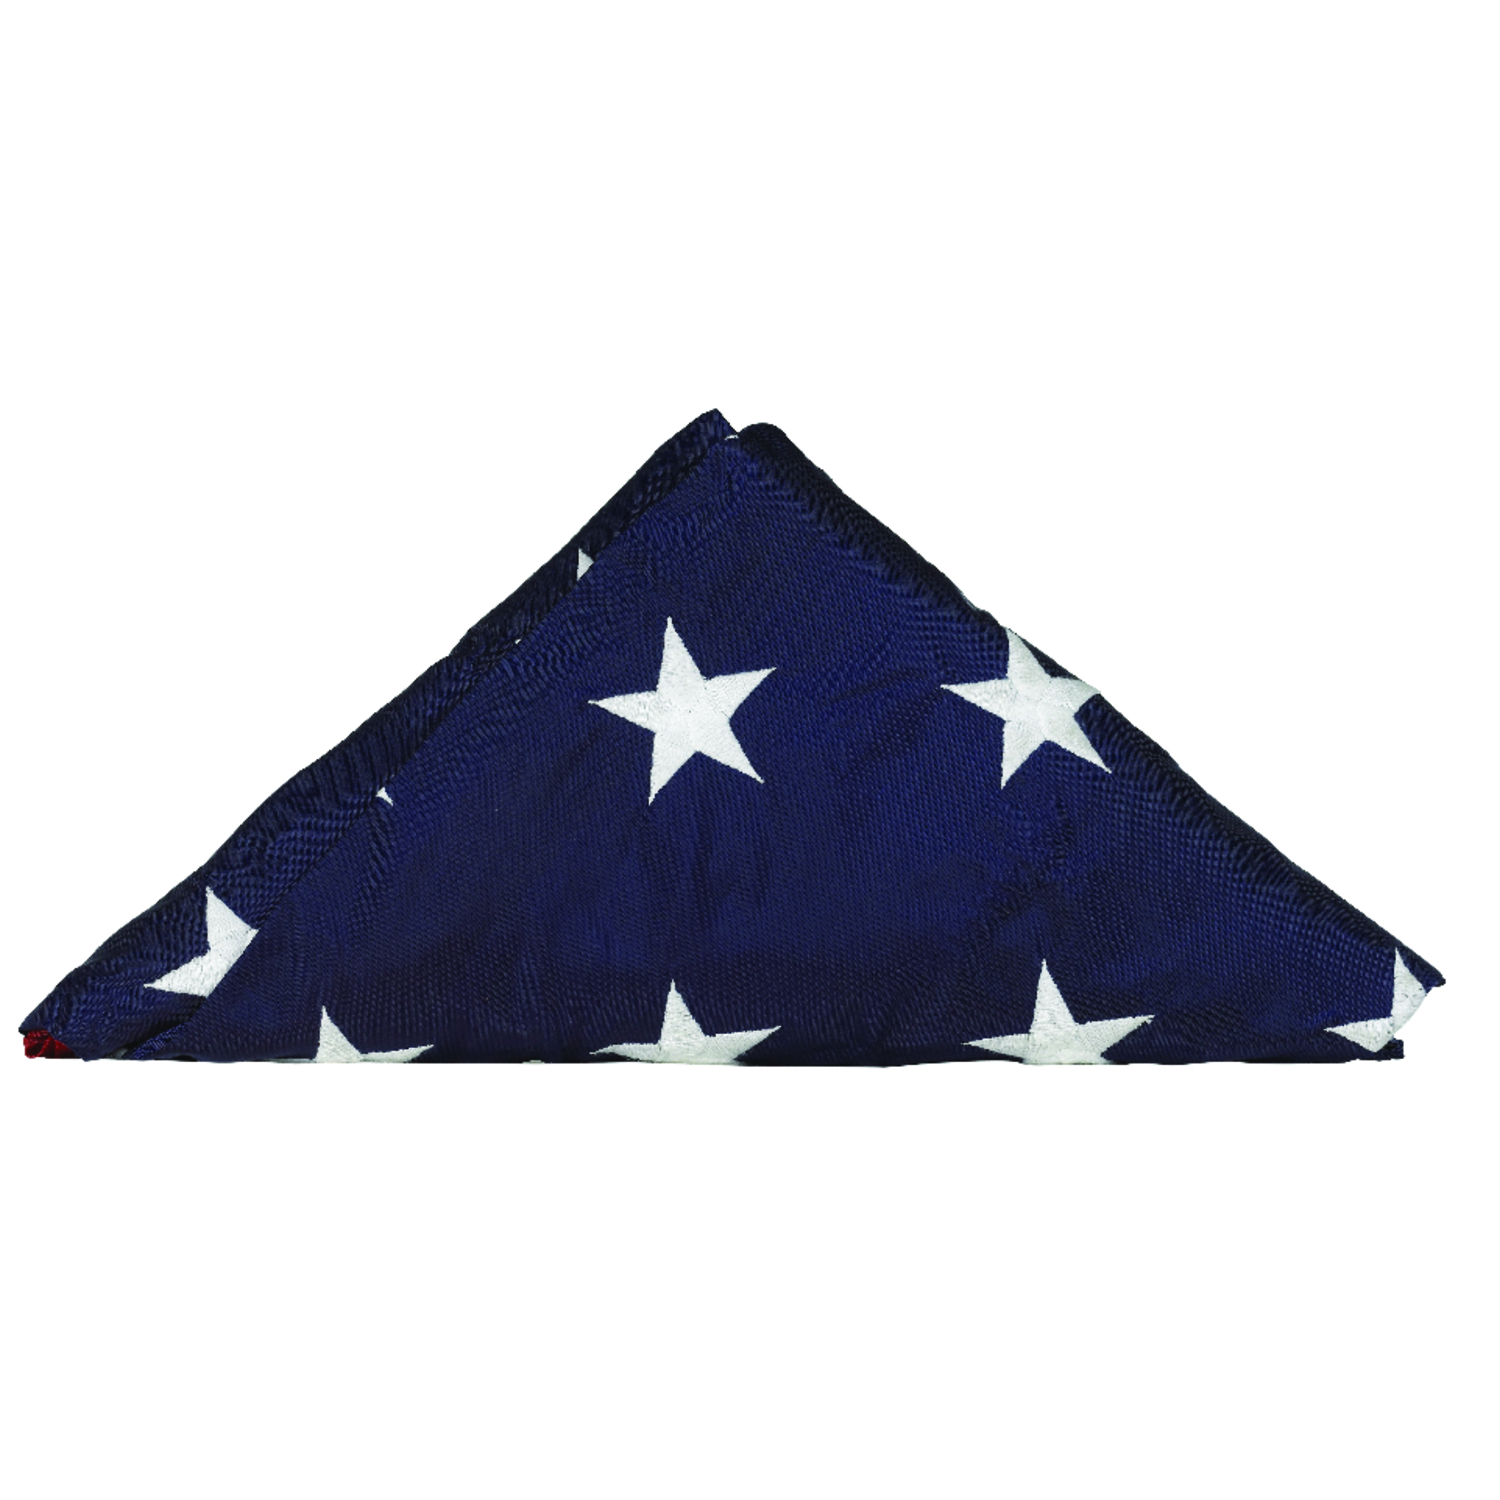 Valley Forge American Flag 60 in. H X 96 in. W